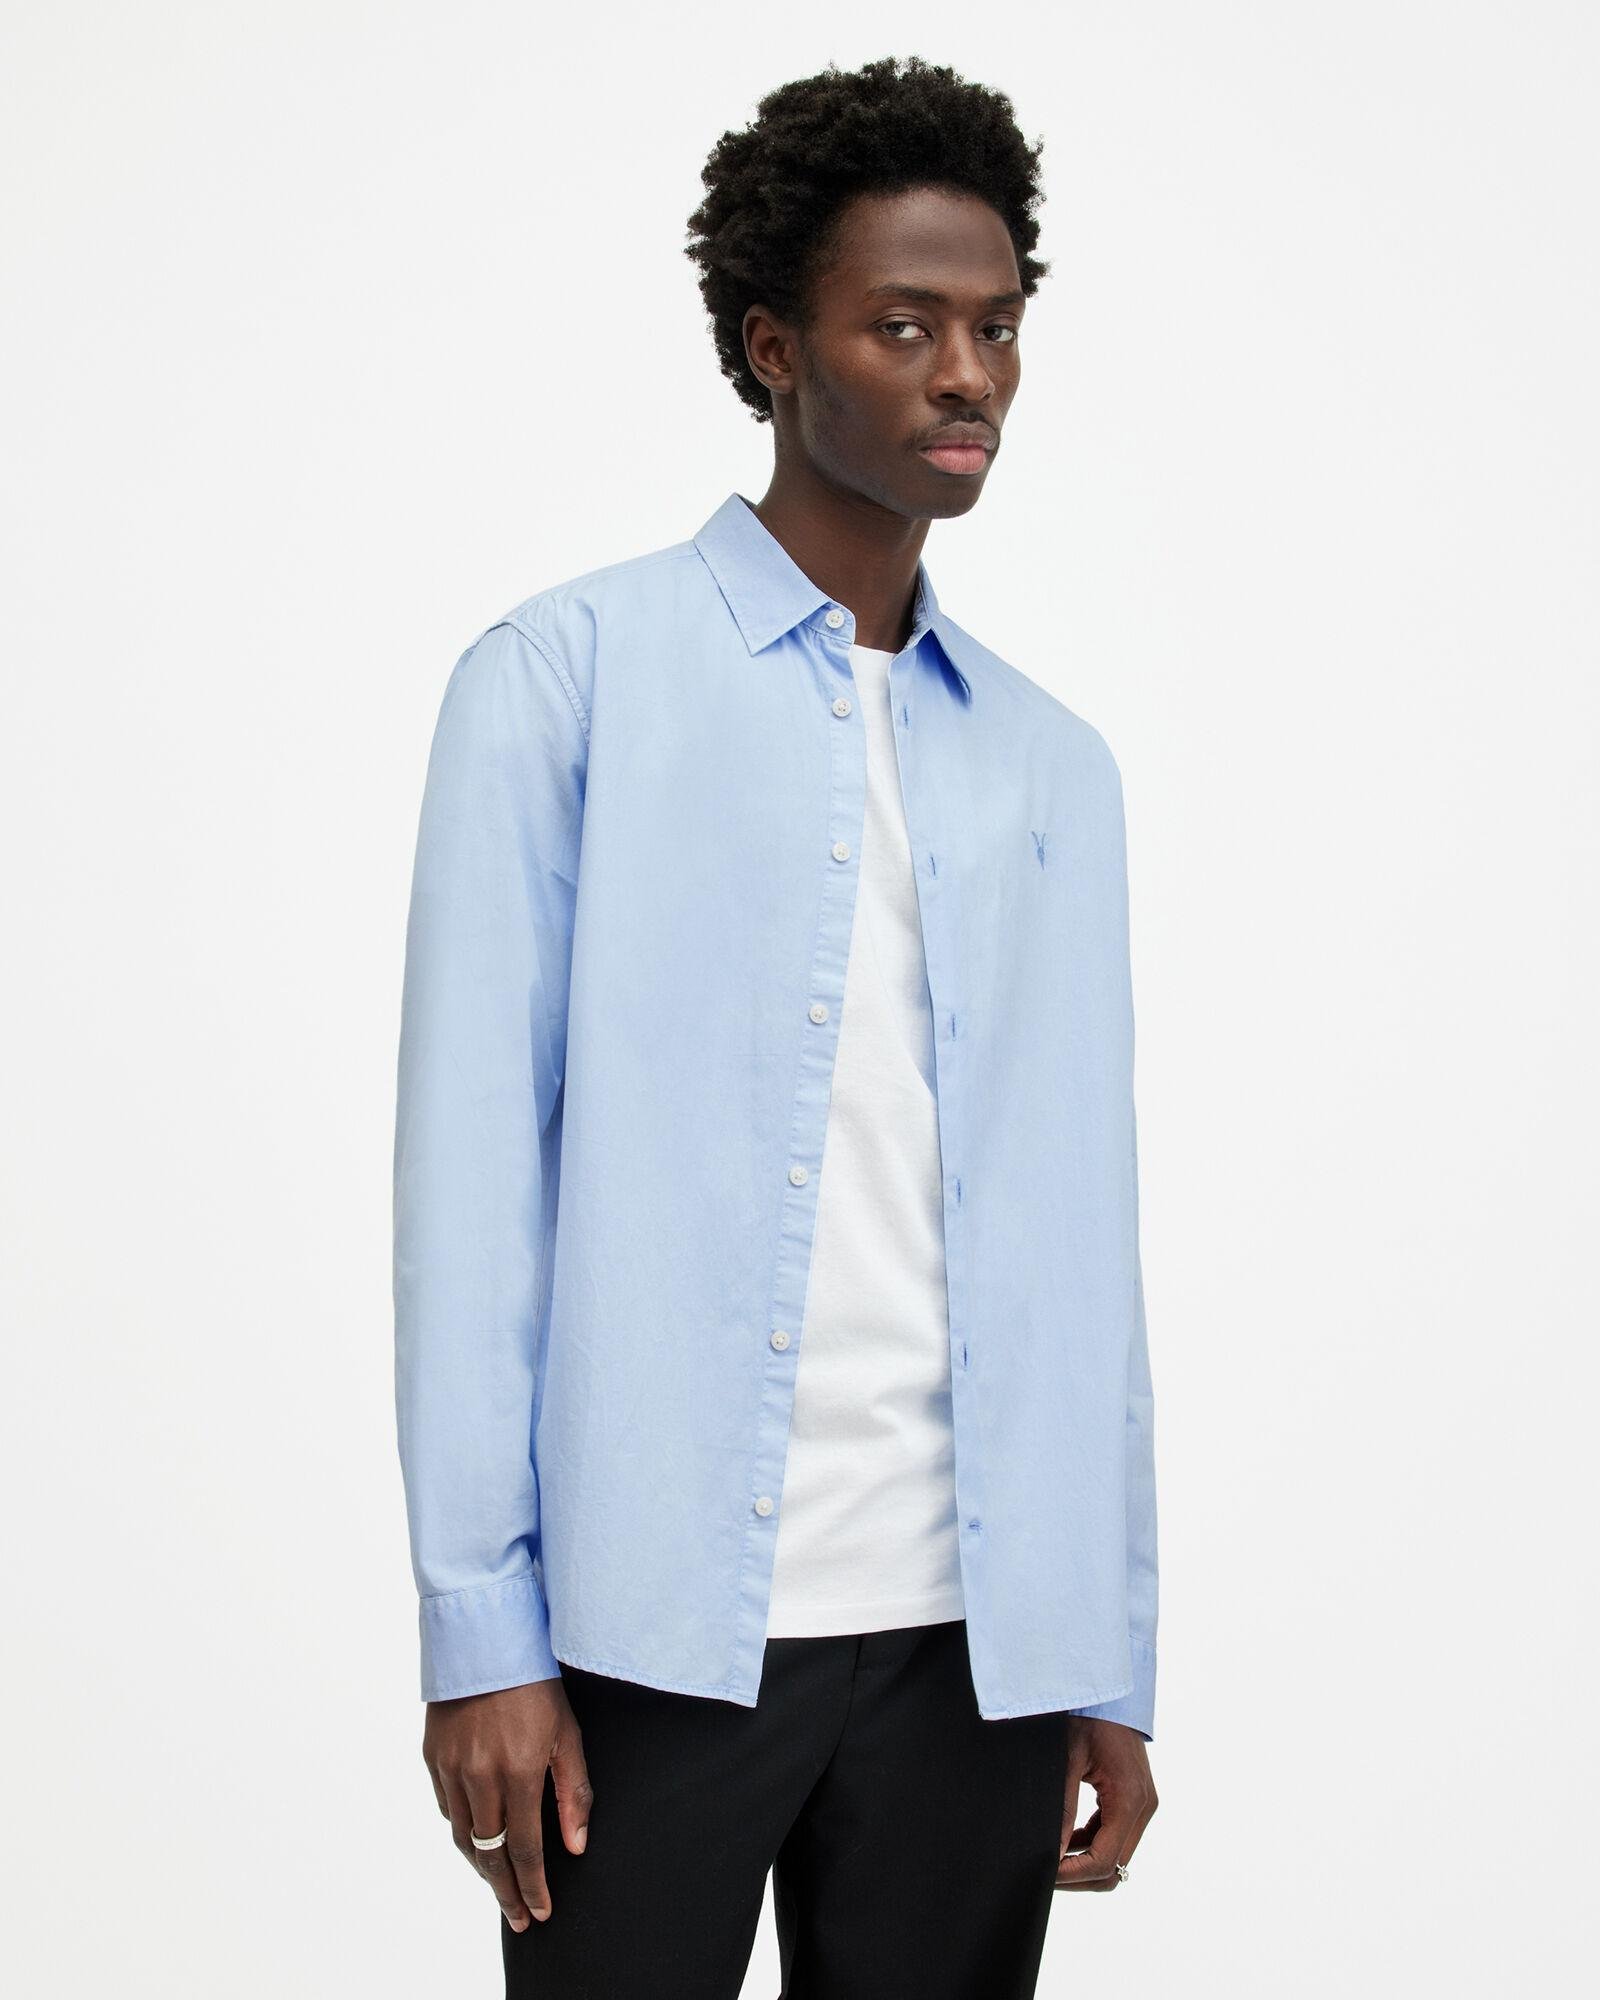 Tahoe Garment Dyed Relaxed Fit Shirt by ALLSAINTS